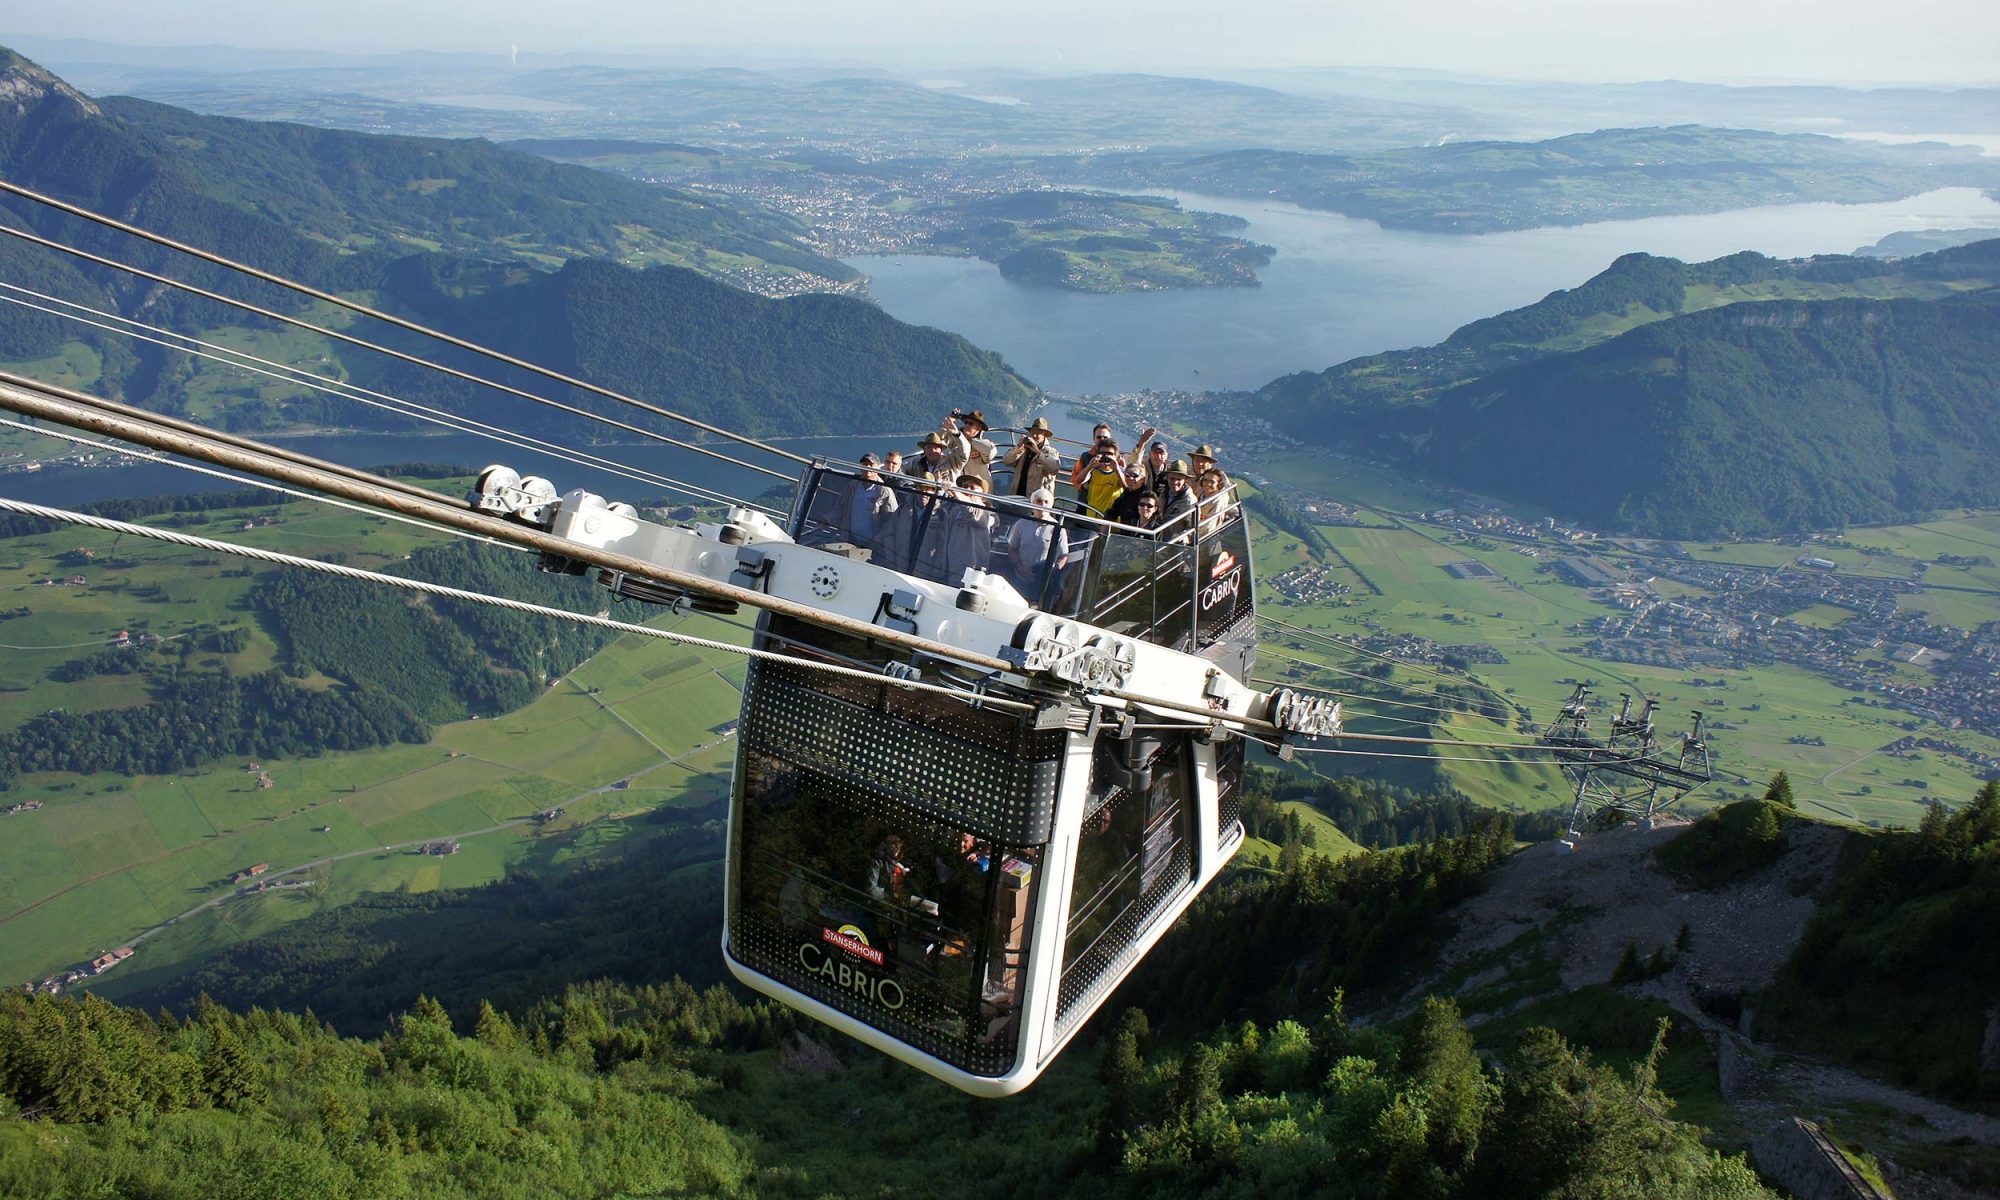 The Stanserhorn Cabrio cablecar. A double decker. Different types of lifts on resorts (I can think of) and how to ride them.